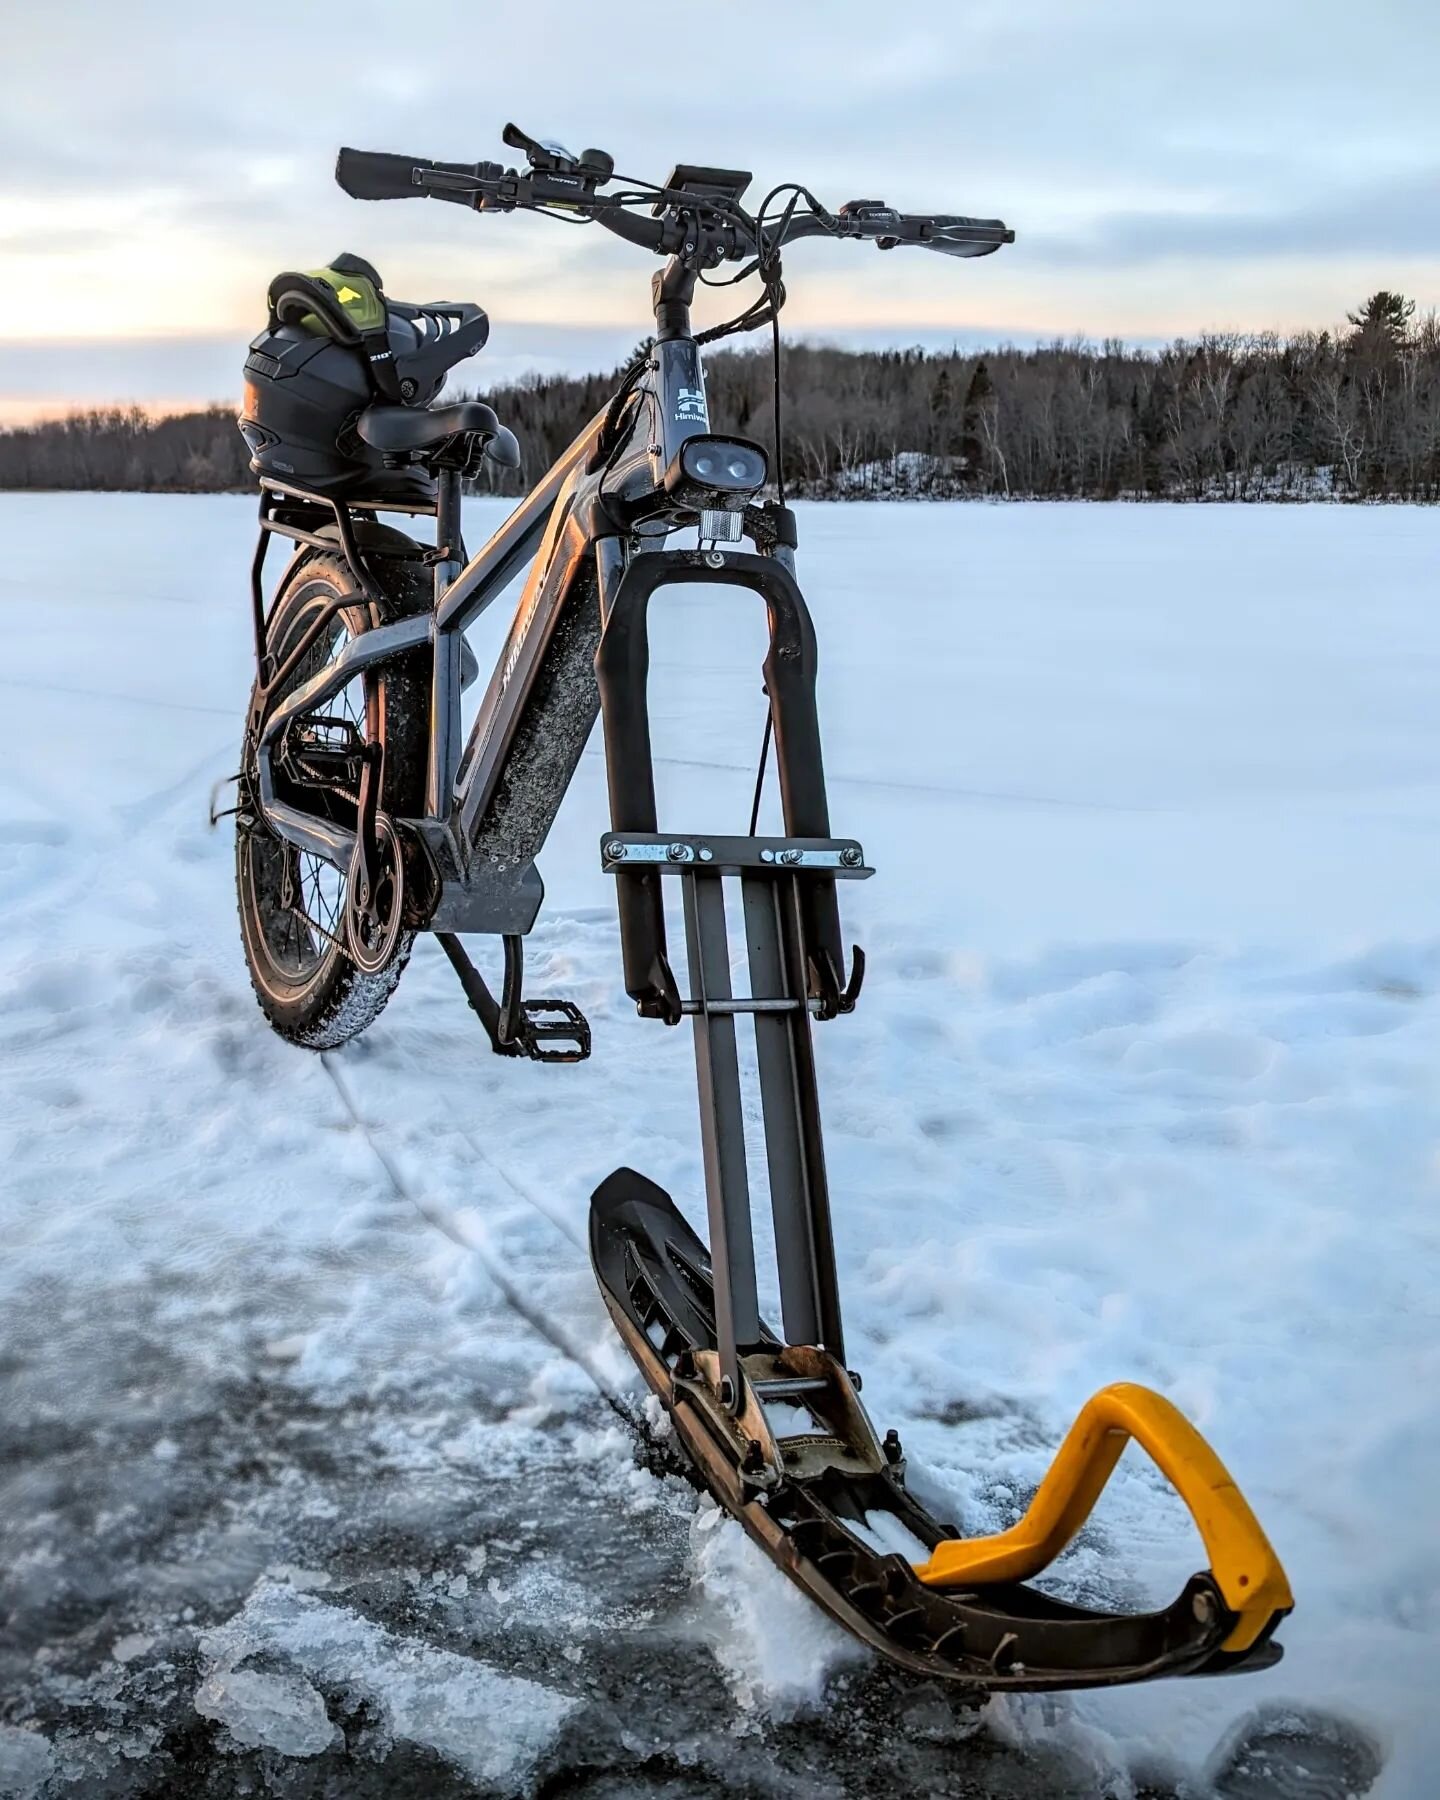 I had a crazy idea to mount a ski to my @himiwaybike not sure if it was worth it, but it was definitely a lot of fun! Check out the build on my YouTube channel.